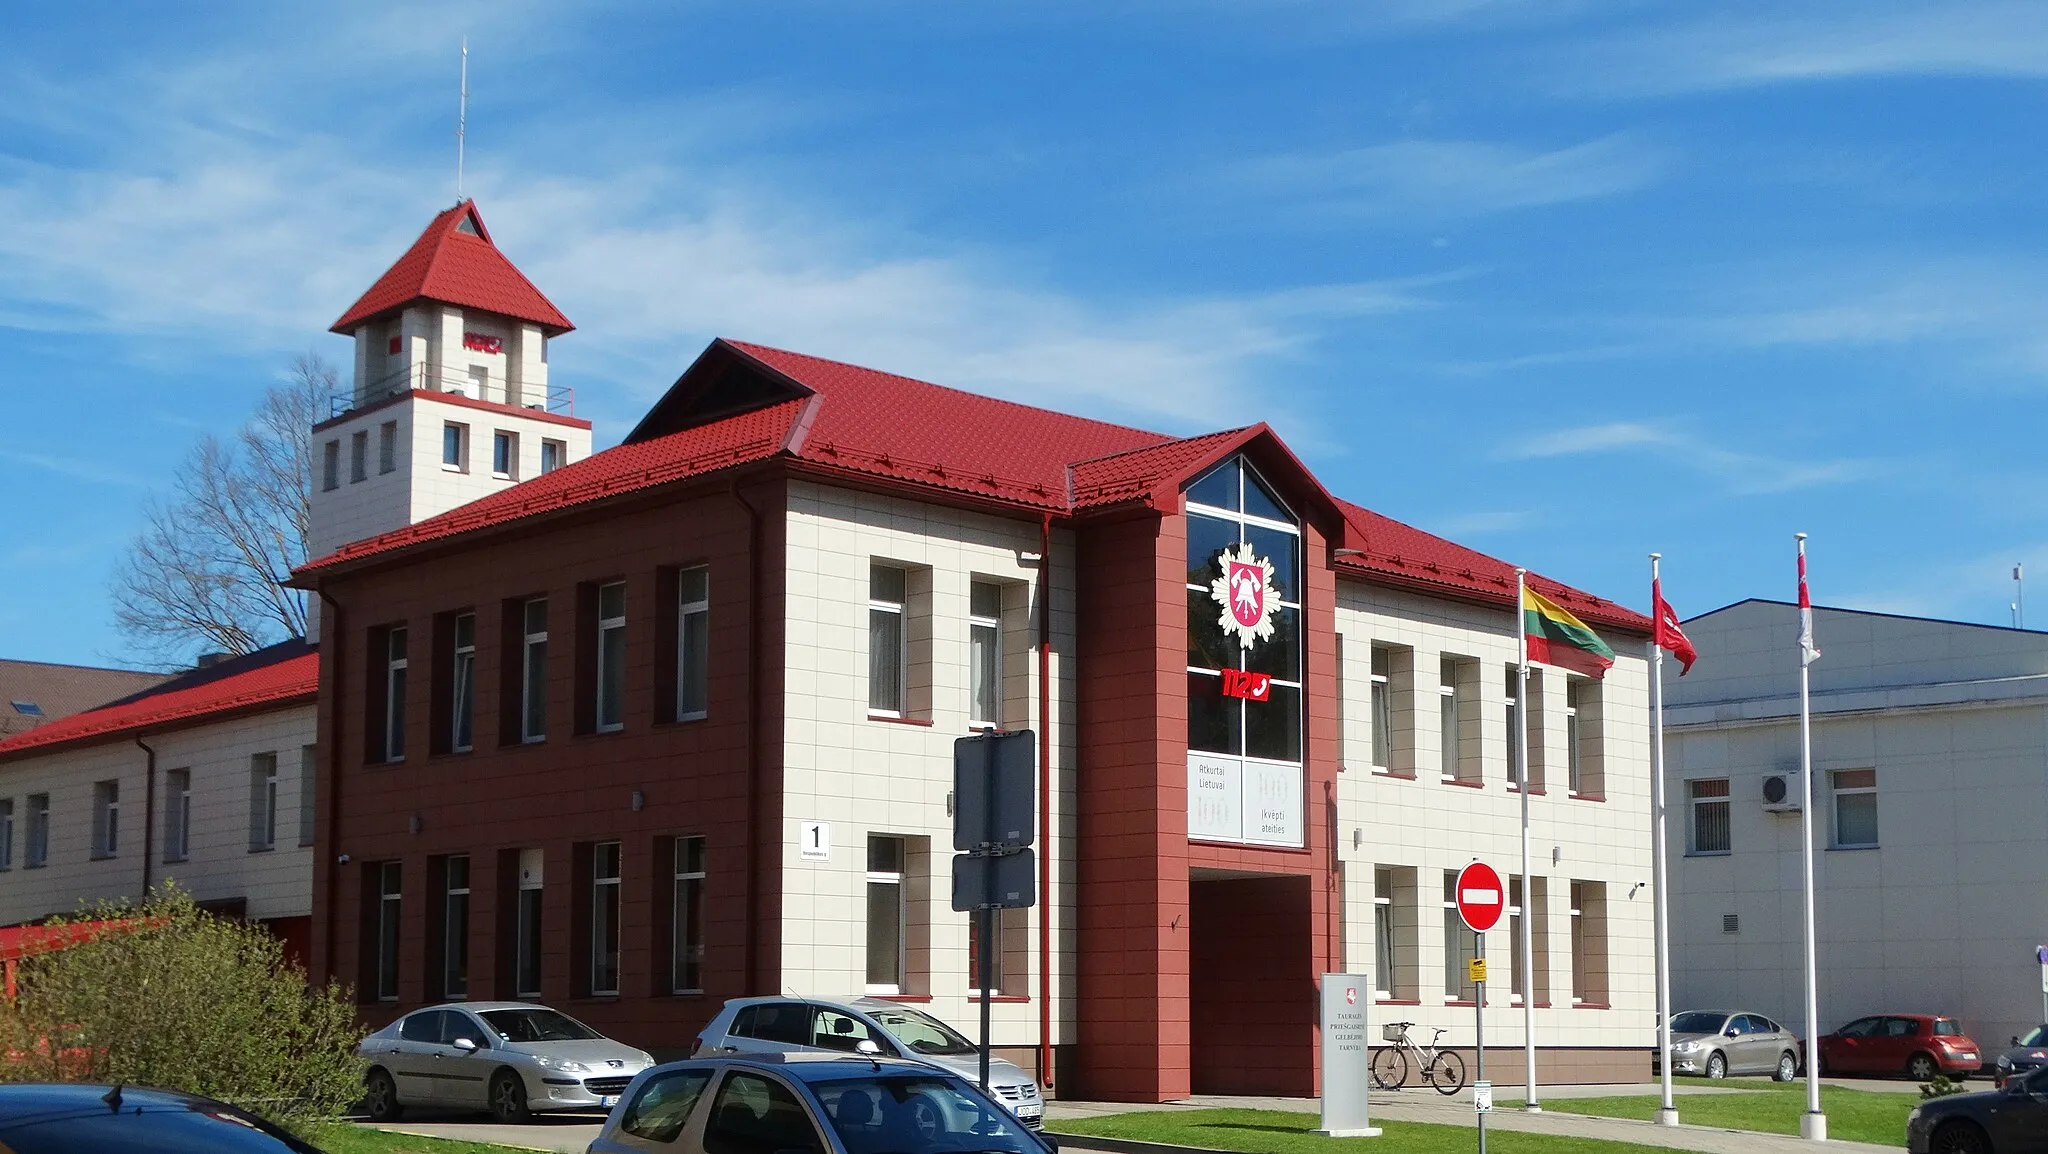 Photo showing: Fire Station, Tauragė, Lithuania